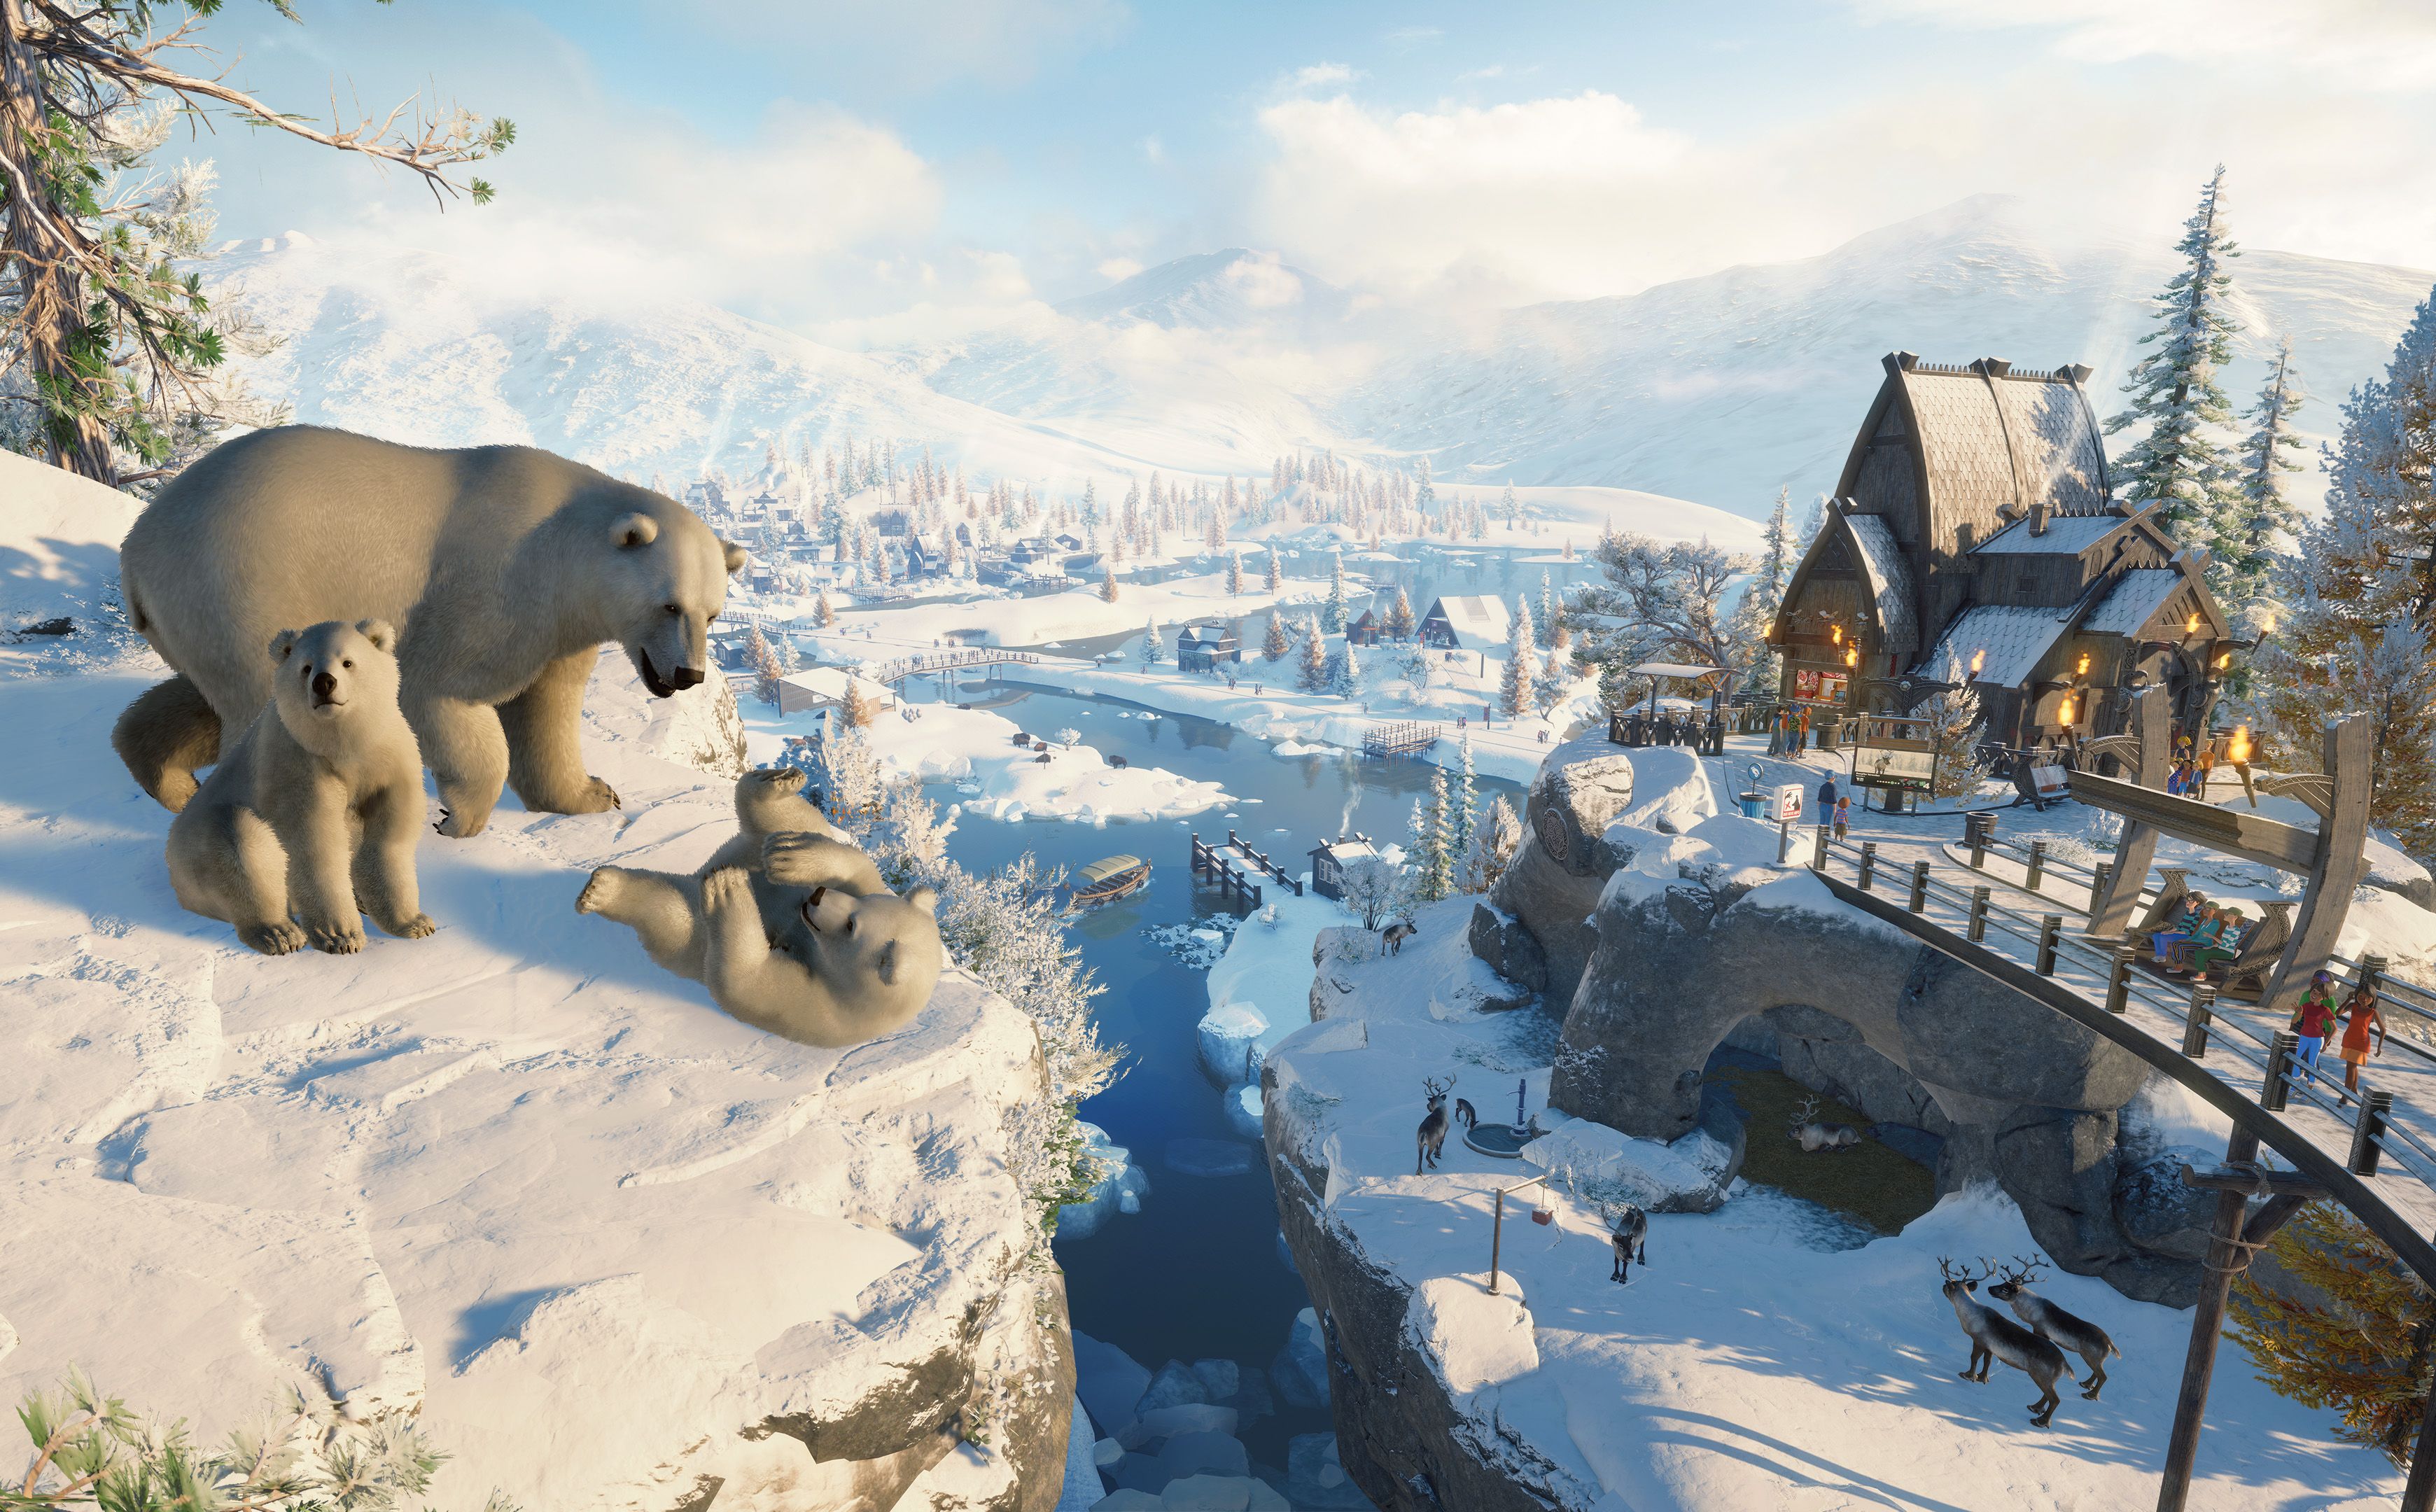 planet zoo arctic pack